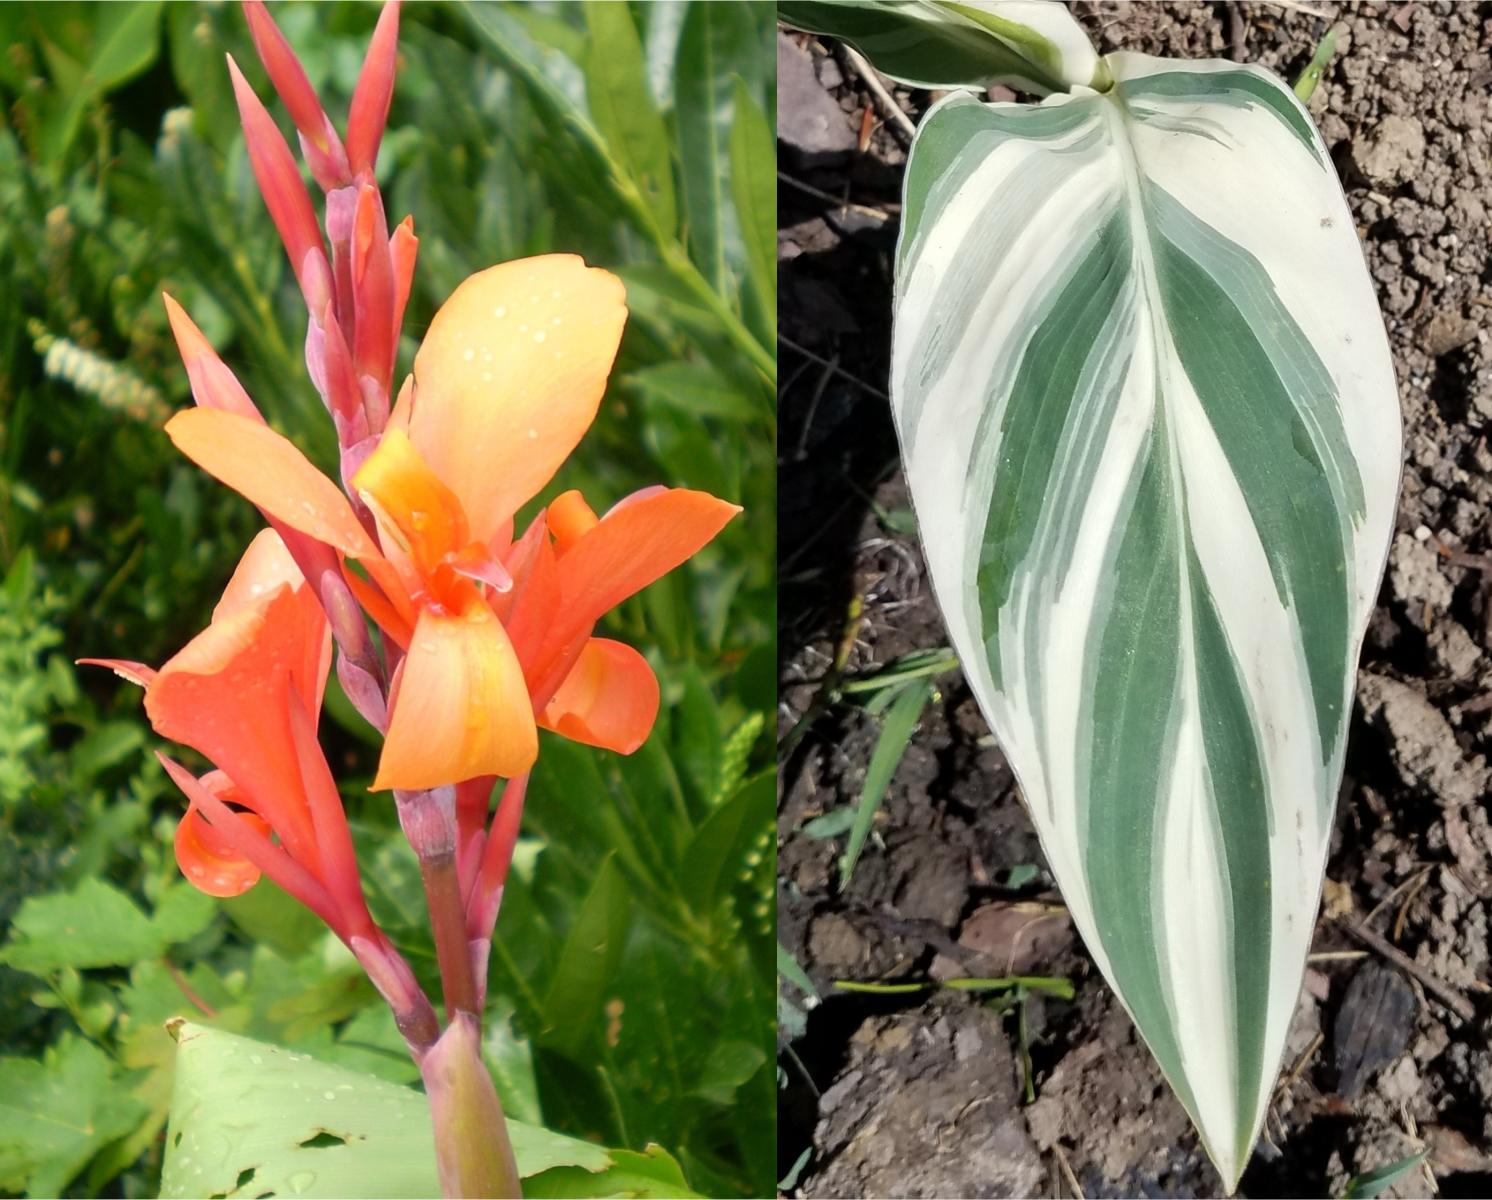 Canna 'Stuttgart' - Canna (Shipping begins March 2022) from Leo Berbee Bulb Company